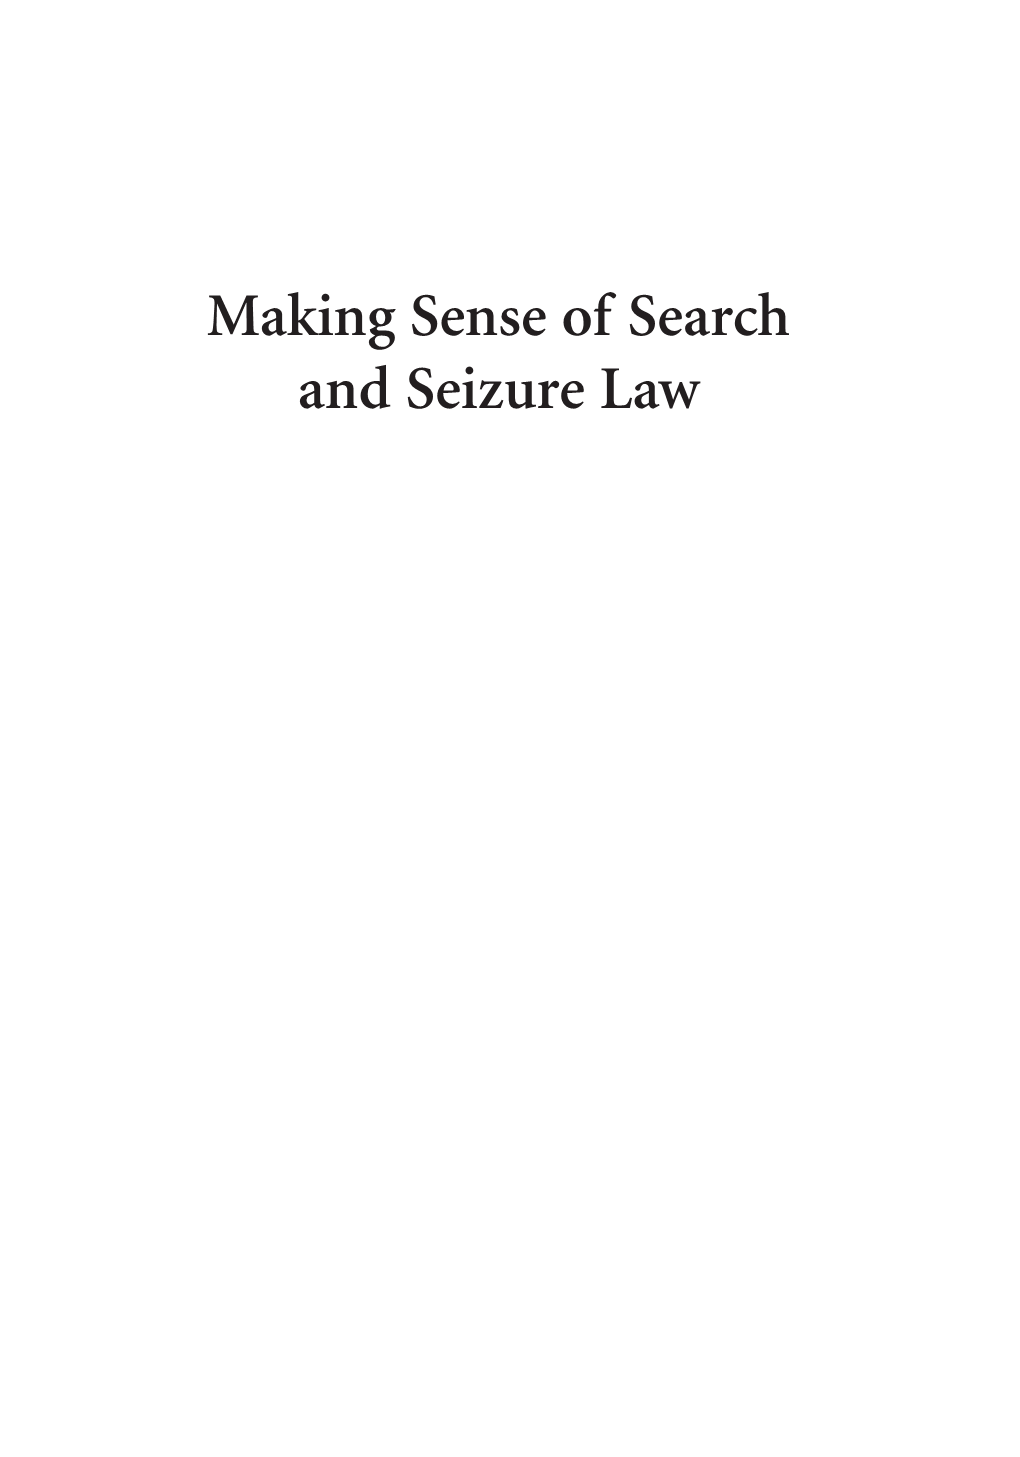 Making Sense of Search and Seizure Law Hubbart 00 Auto Flip 2 4/21/15 1:34 PM Page Ii Hubbart 00 Auto Flip 2 4/21/15 1:34 PM Page Iii